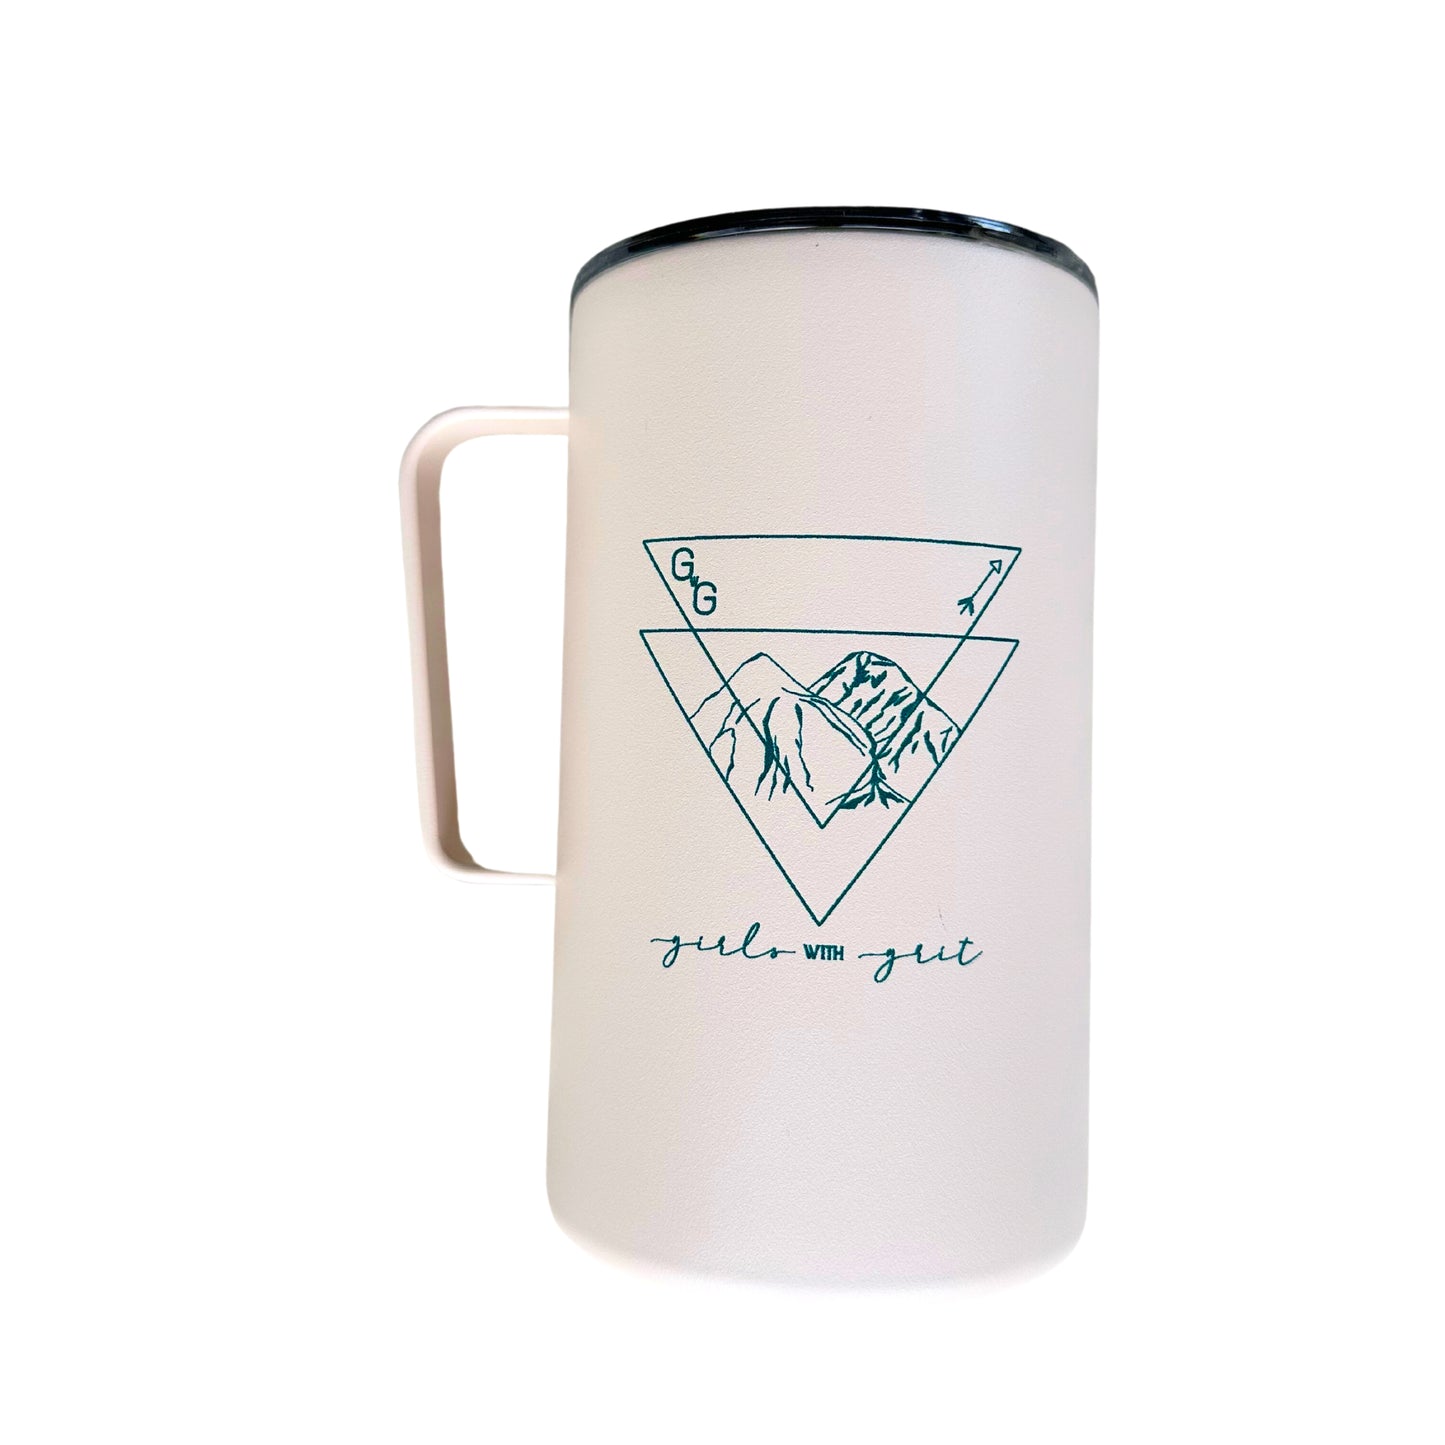 Dusty Pink Girls with Grit 20 Ounce Miir Camp Cup